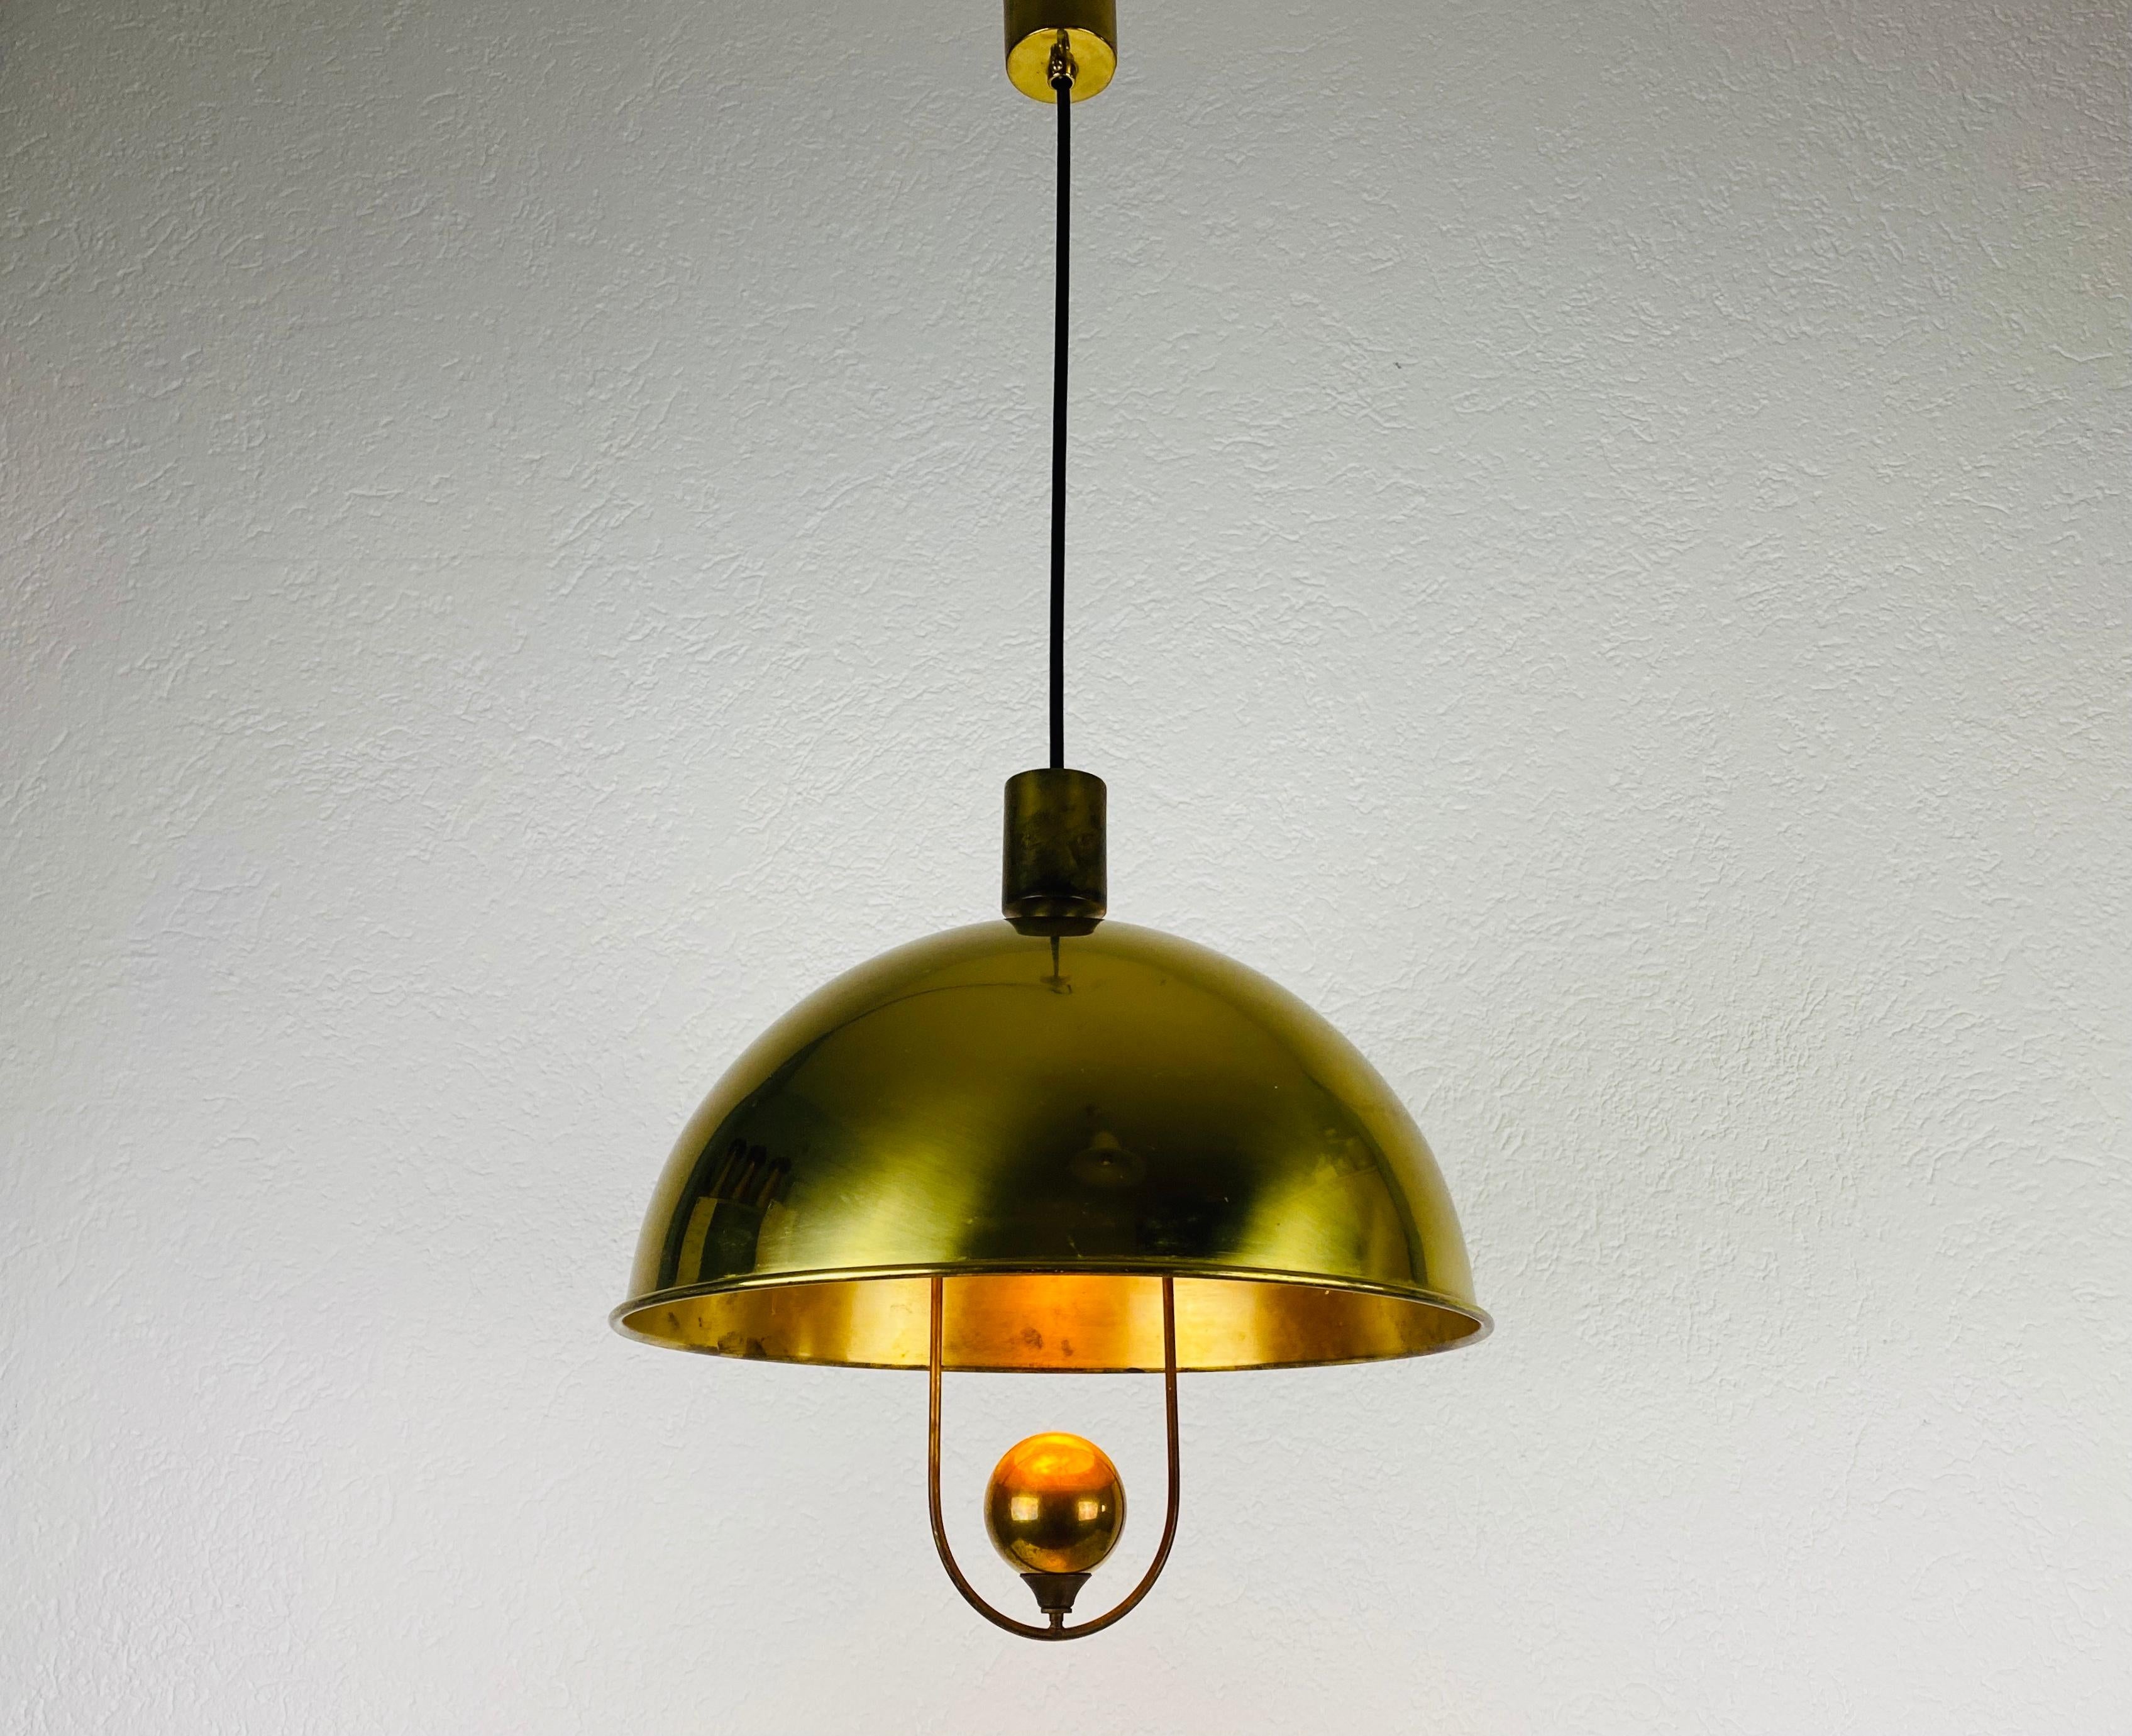 Mid-Century Modern Polished Brass Pendant Lamp by Florian Schulz, 1970s, Germany For Sale